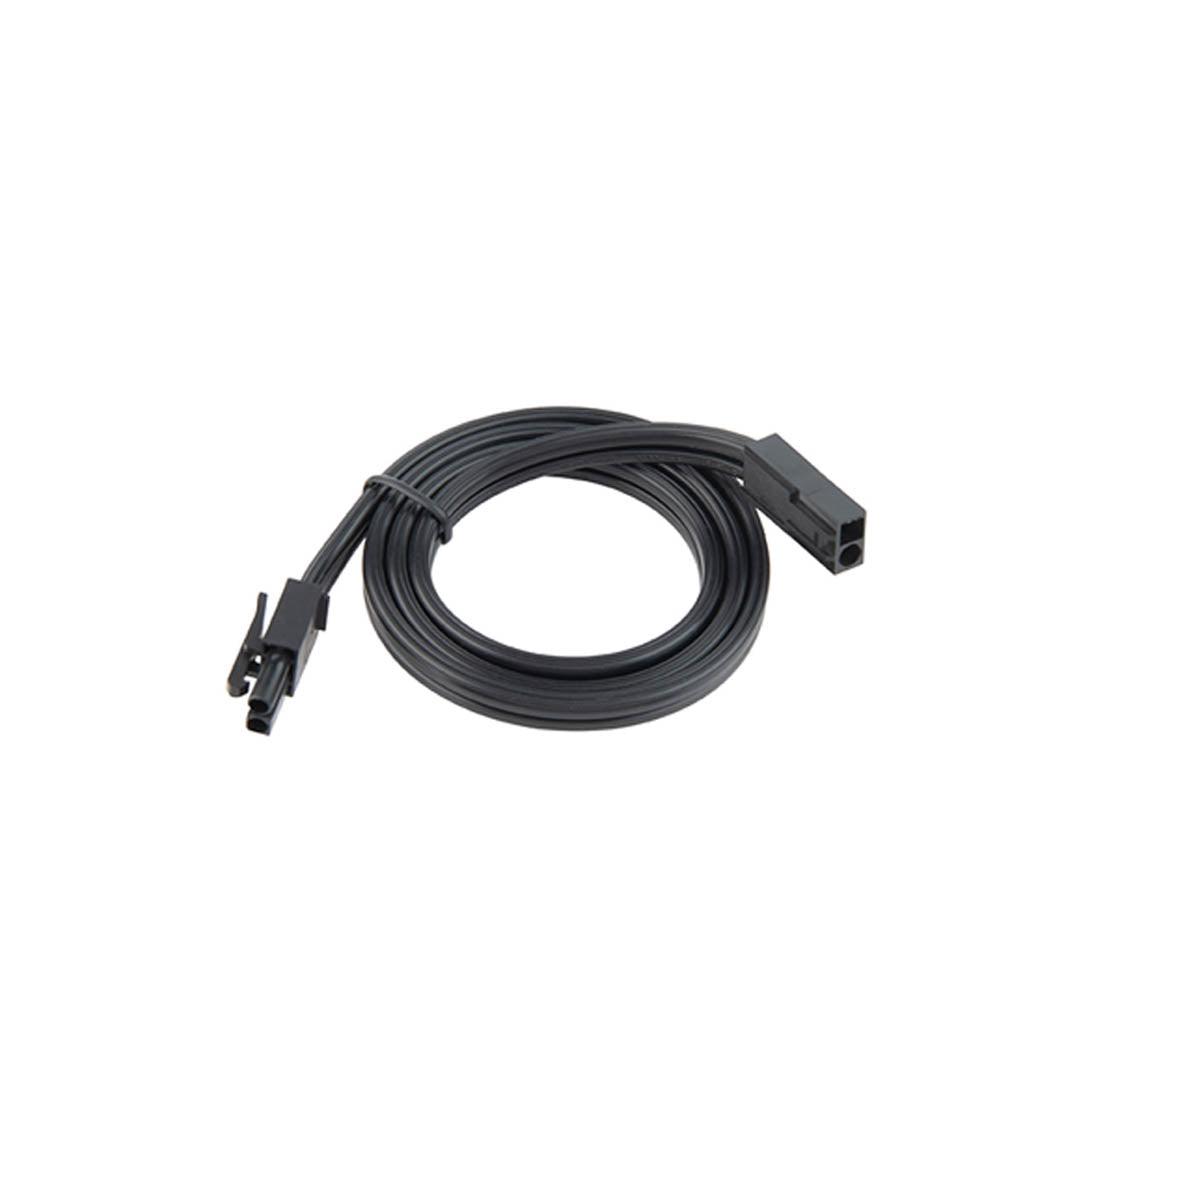 24in. Interconnect Cable for 3-CCT Puck Light, Black - Bees Lighting